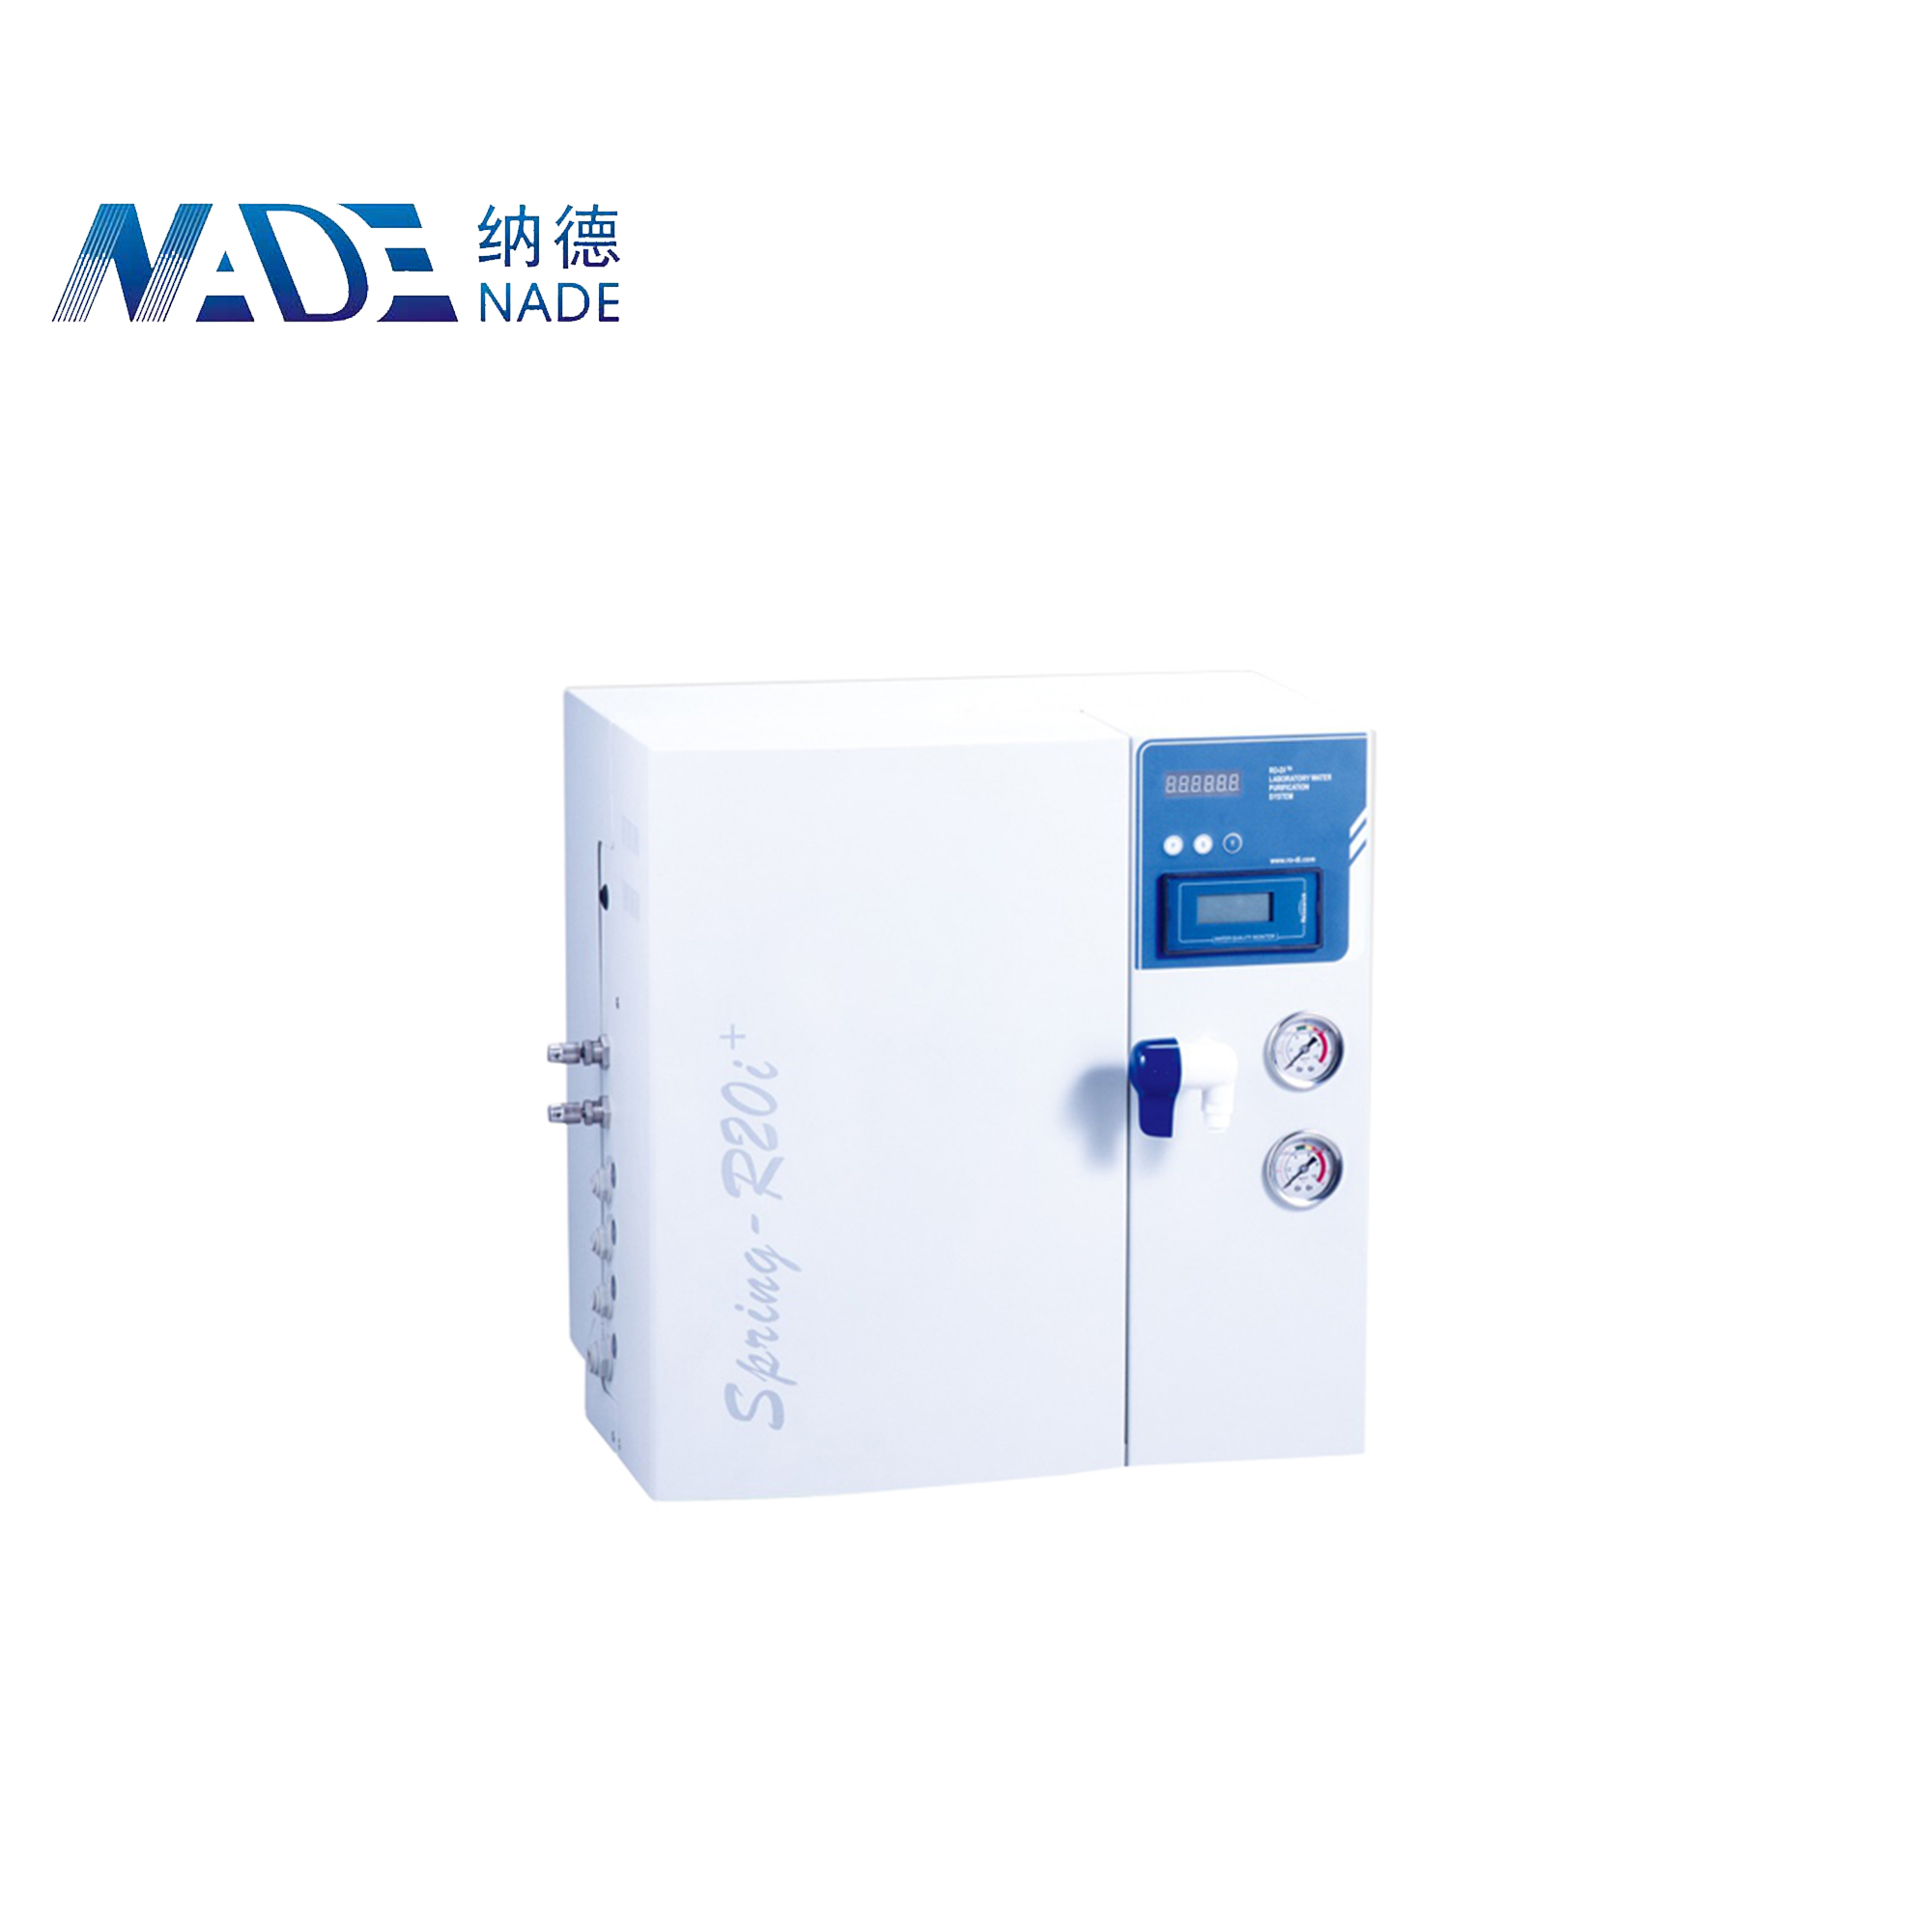 NADE laboratory benchtop type Spring series primary/intermediate water purification system